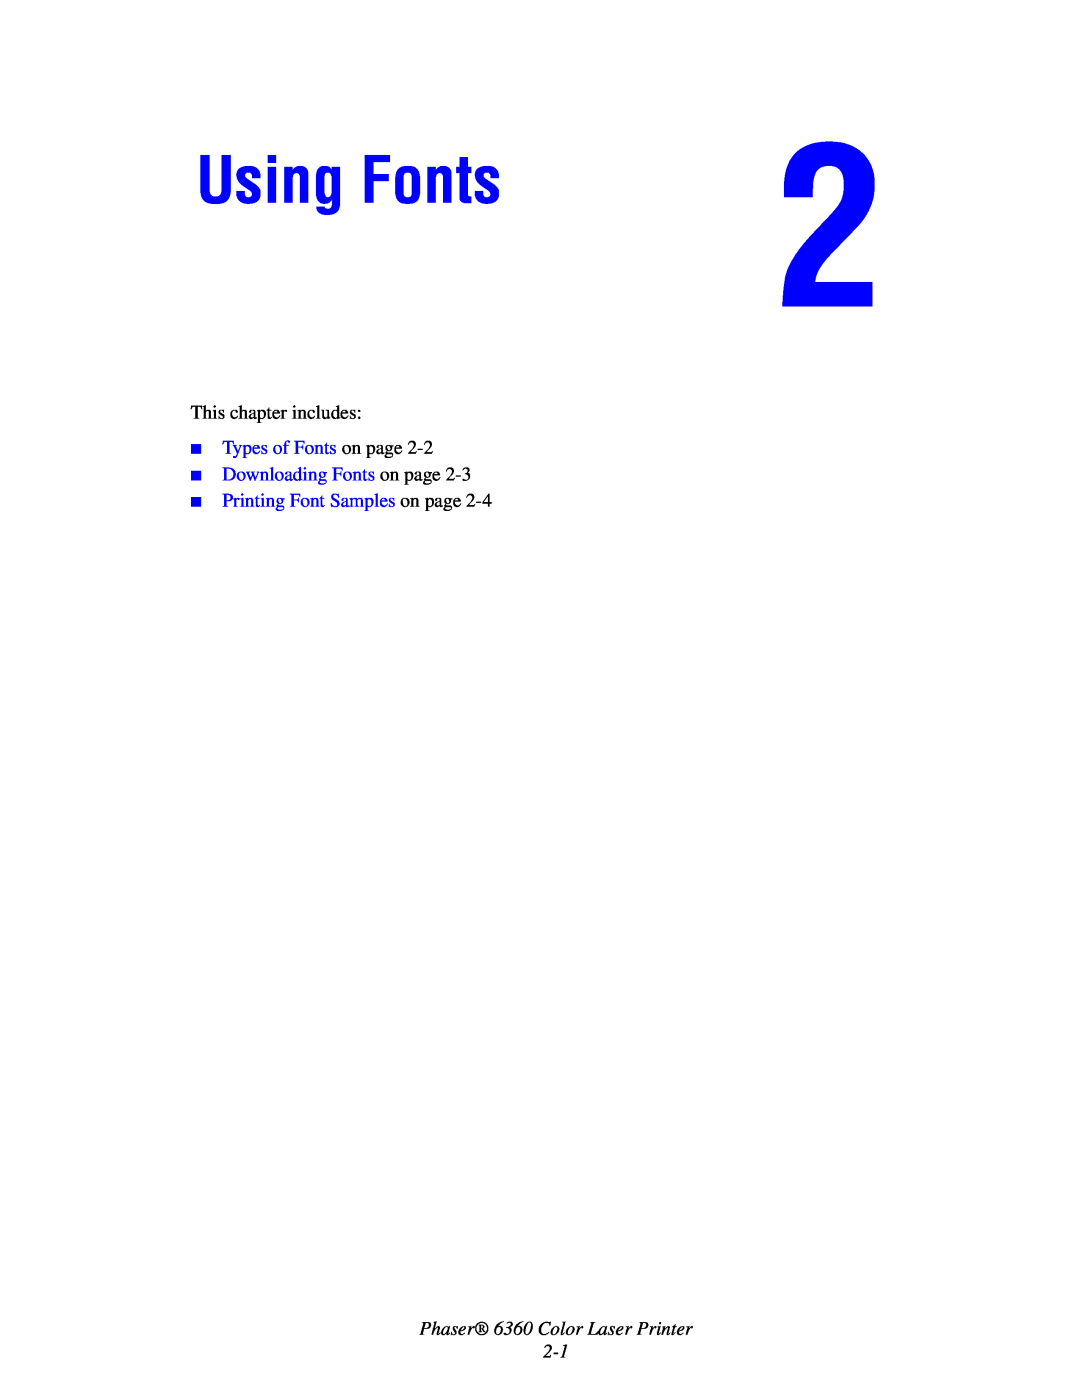 Xerox 6360 manual Using Fonts, Types of Fonts on page Downloading Fonts on page, Printing Font Samples on page 